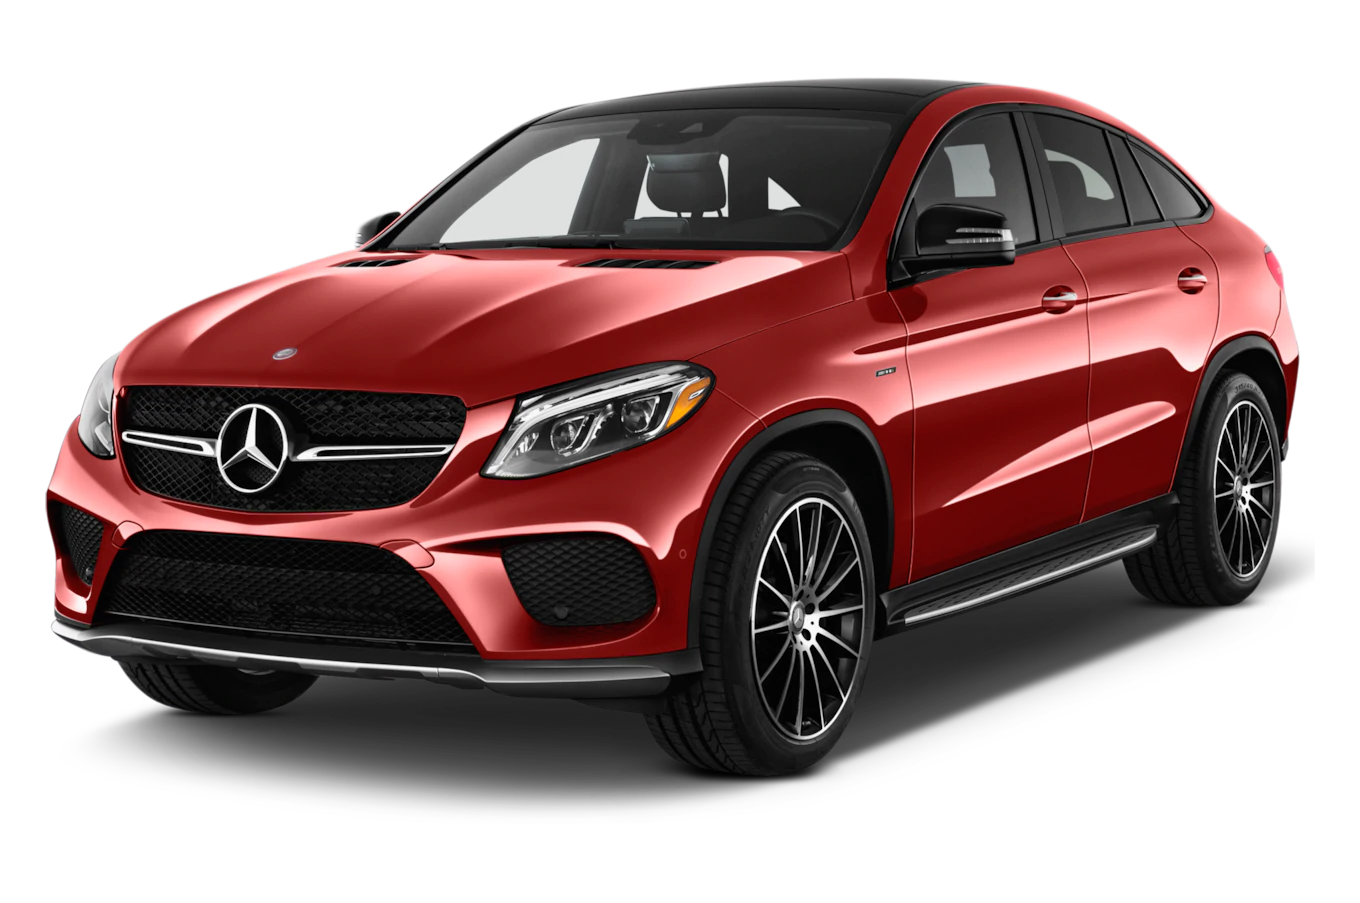 Specifications Of The Mercedes Mercedes Benz Gle Class 2017